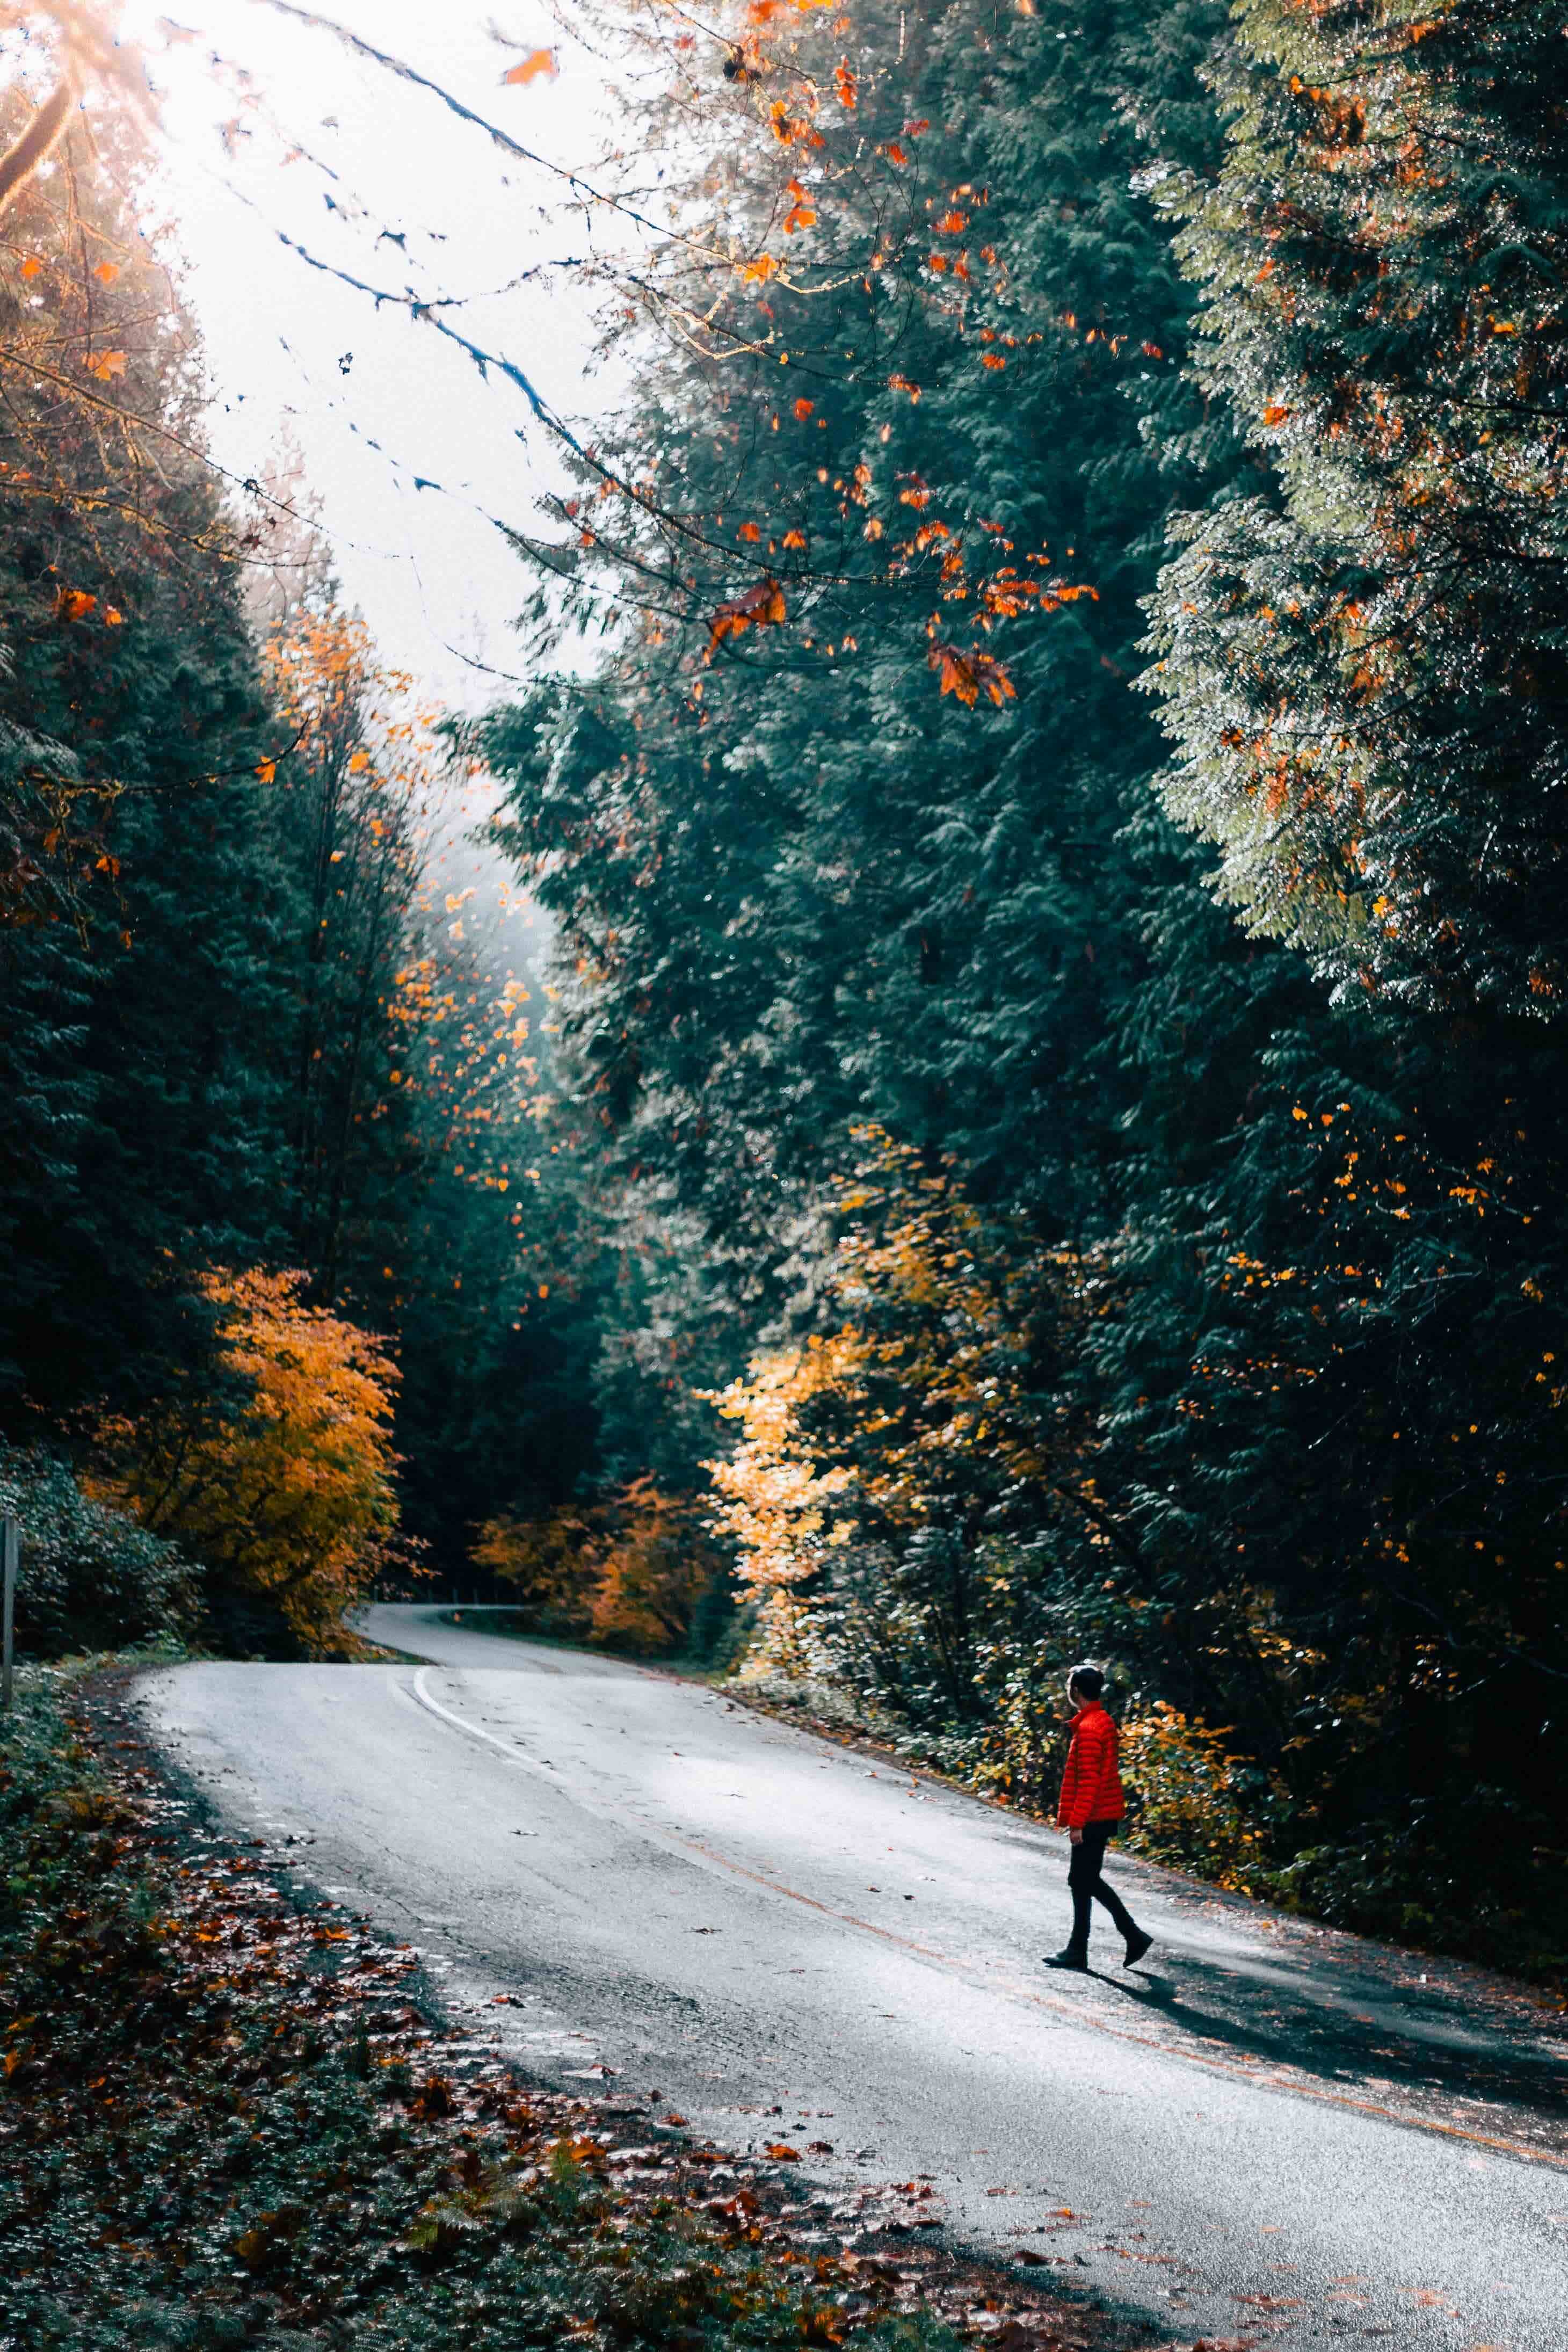 A photo of myself walking down a road in rainy British Columbia